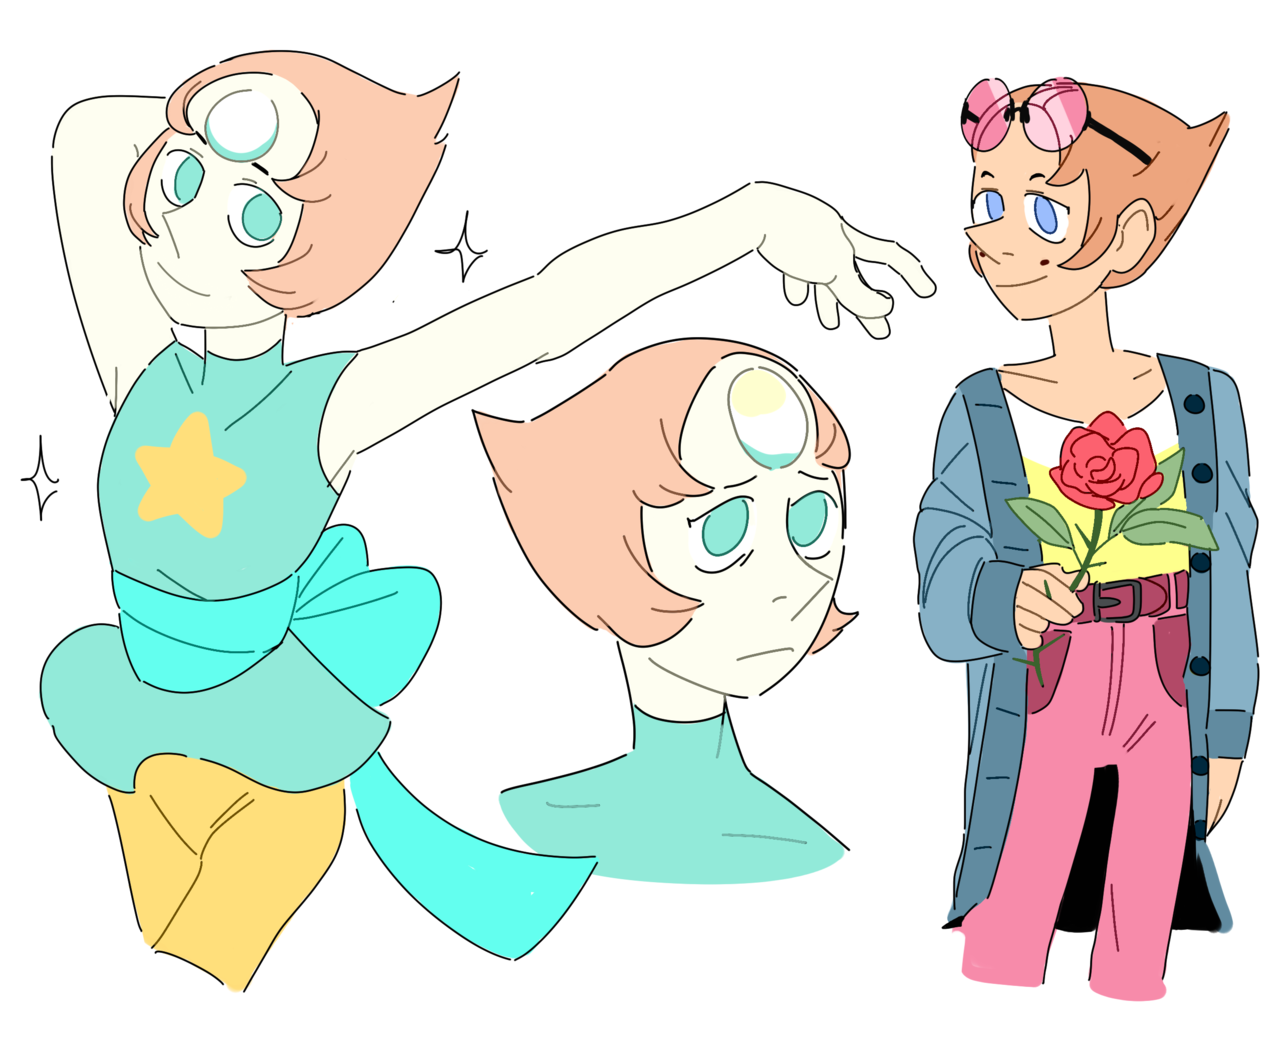 I try to draw the Pearls more into my style…